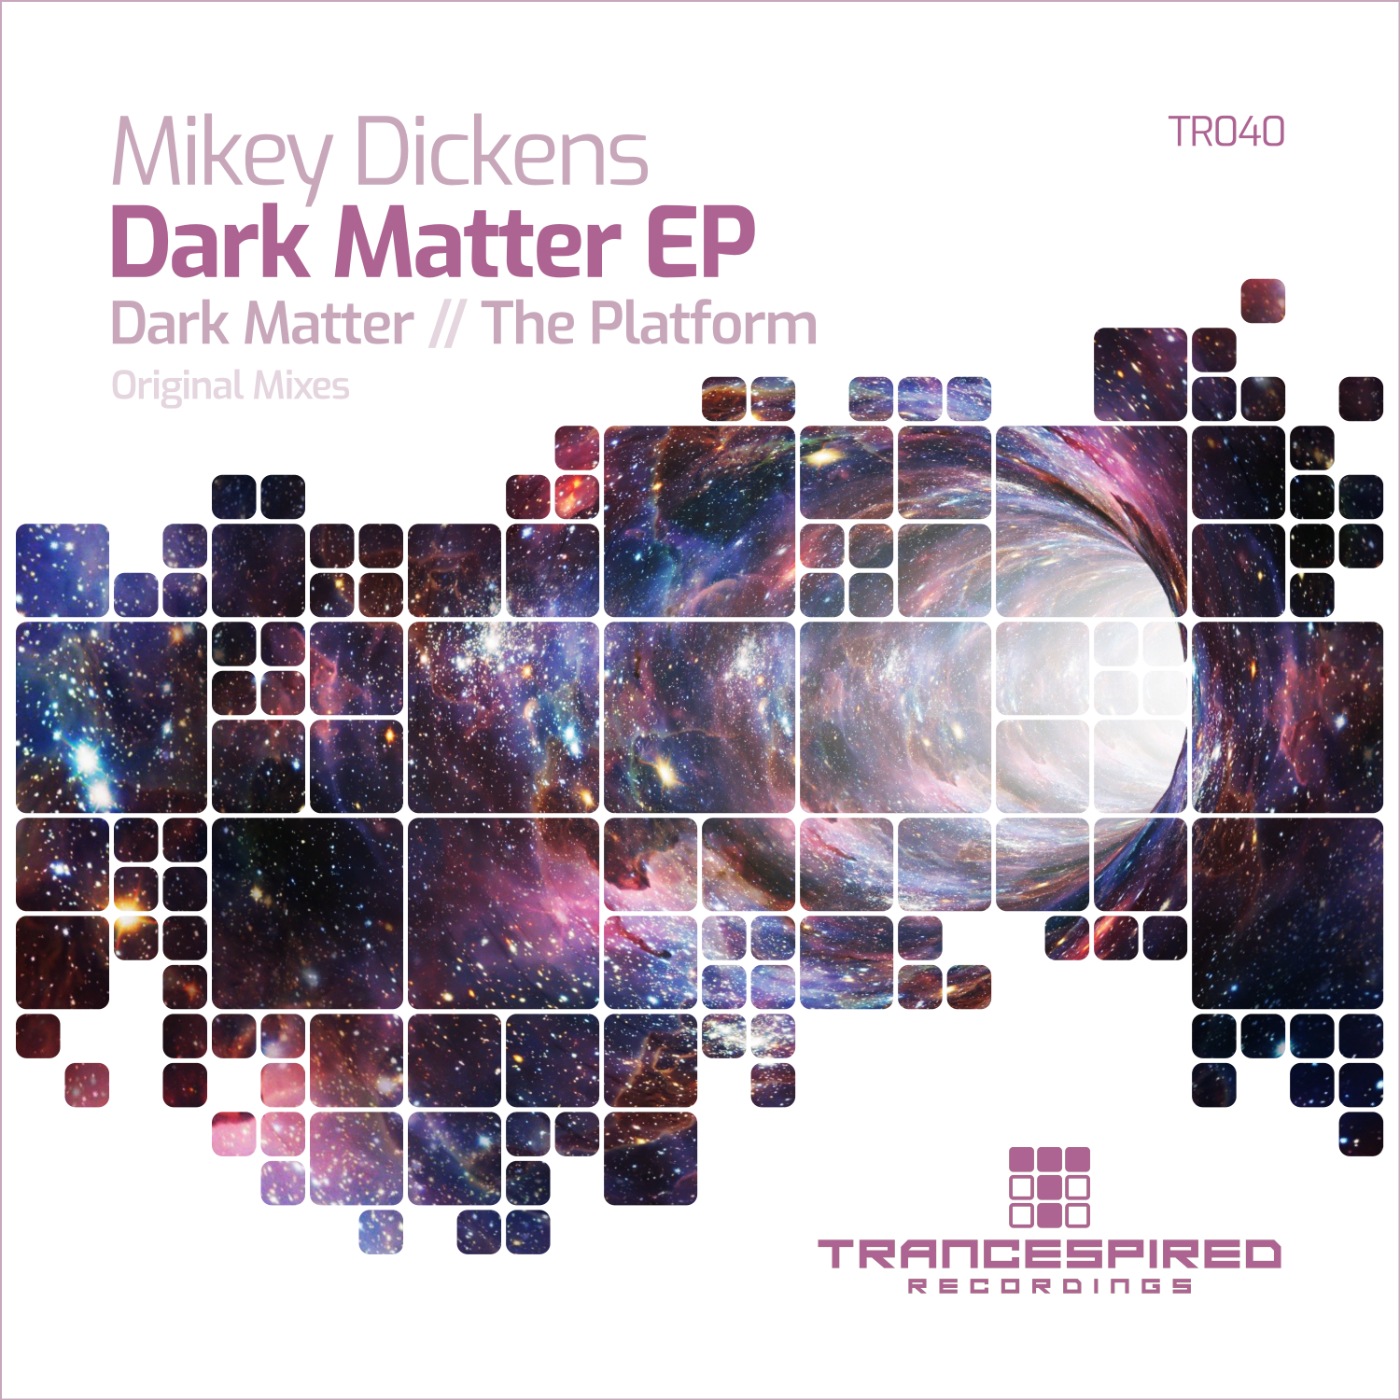 Mikey Dickens presents Dark Matter EP on Trancespired Recordings